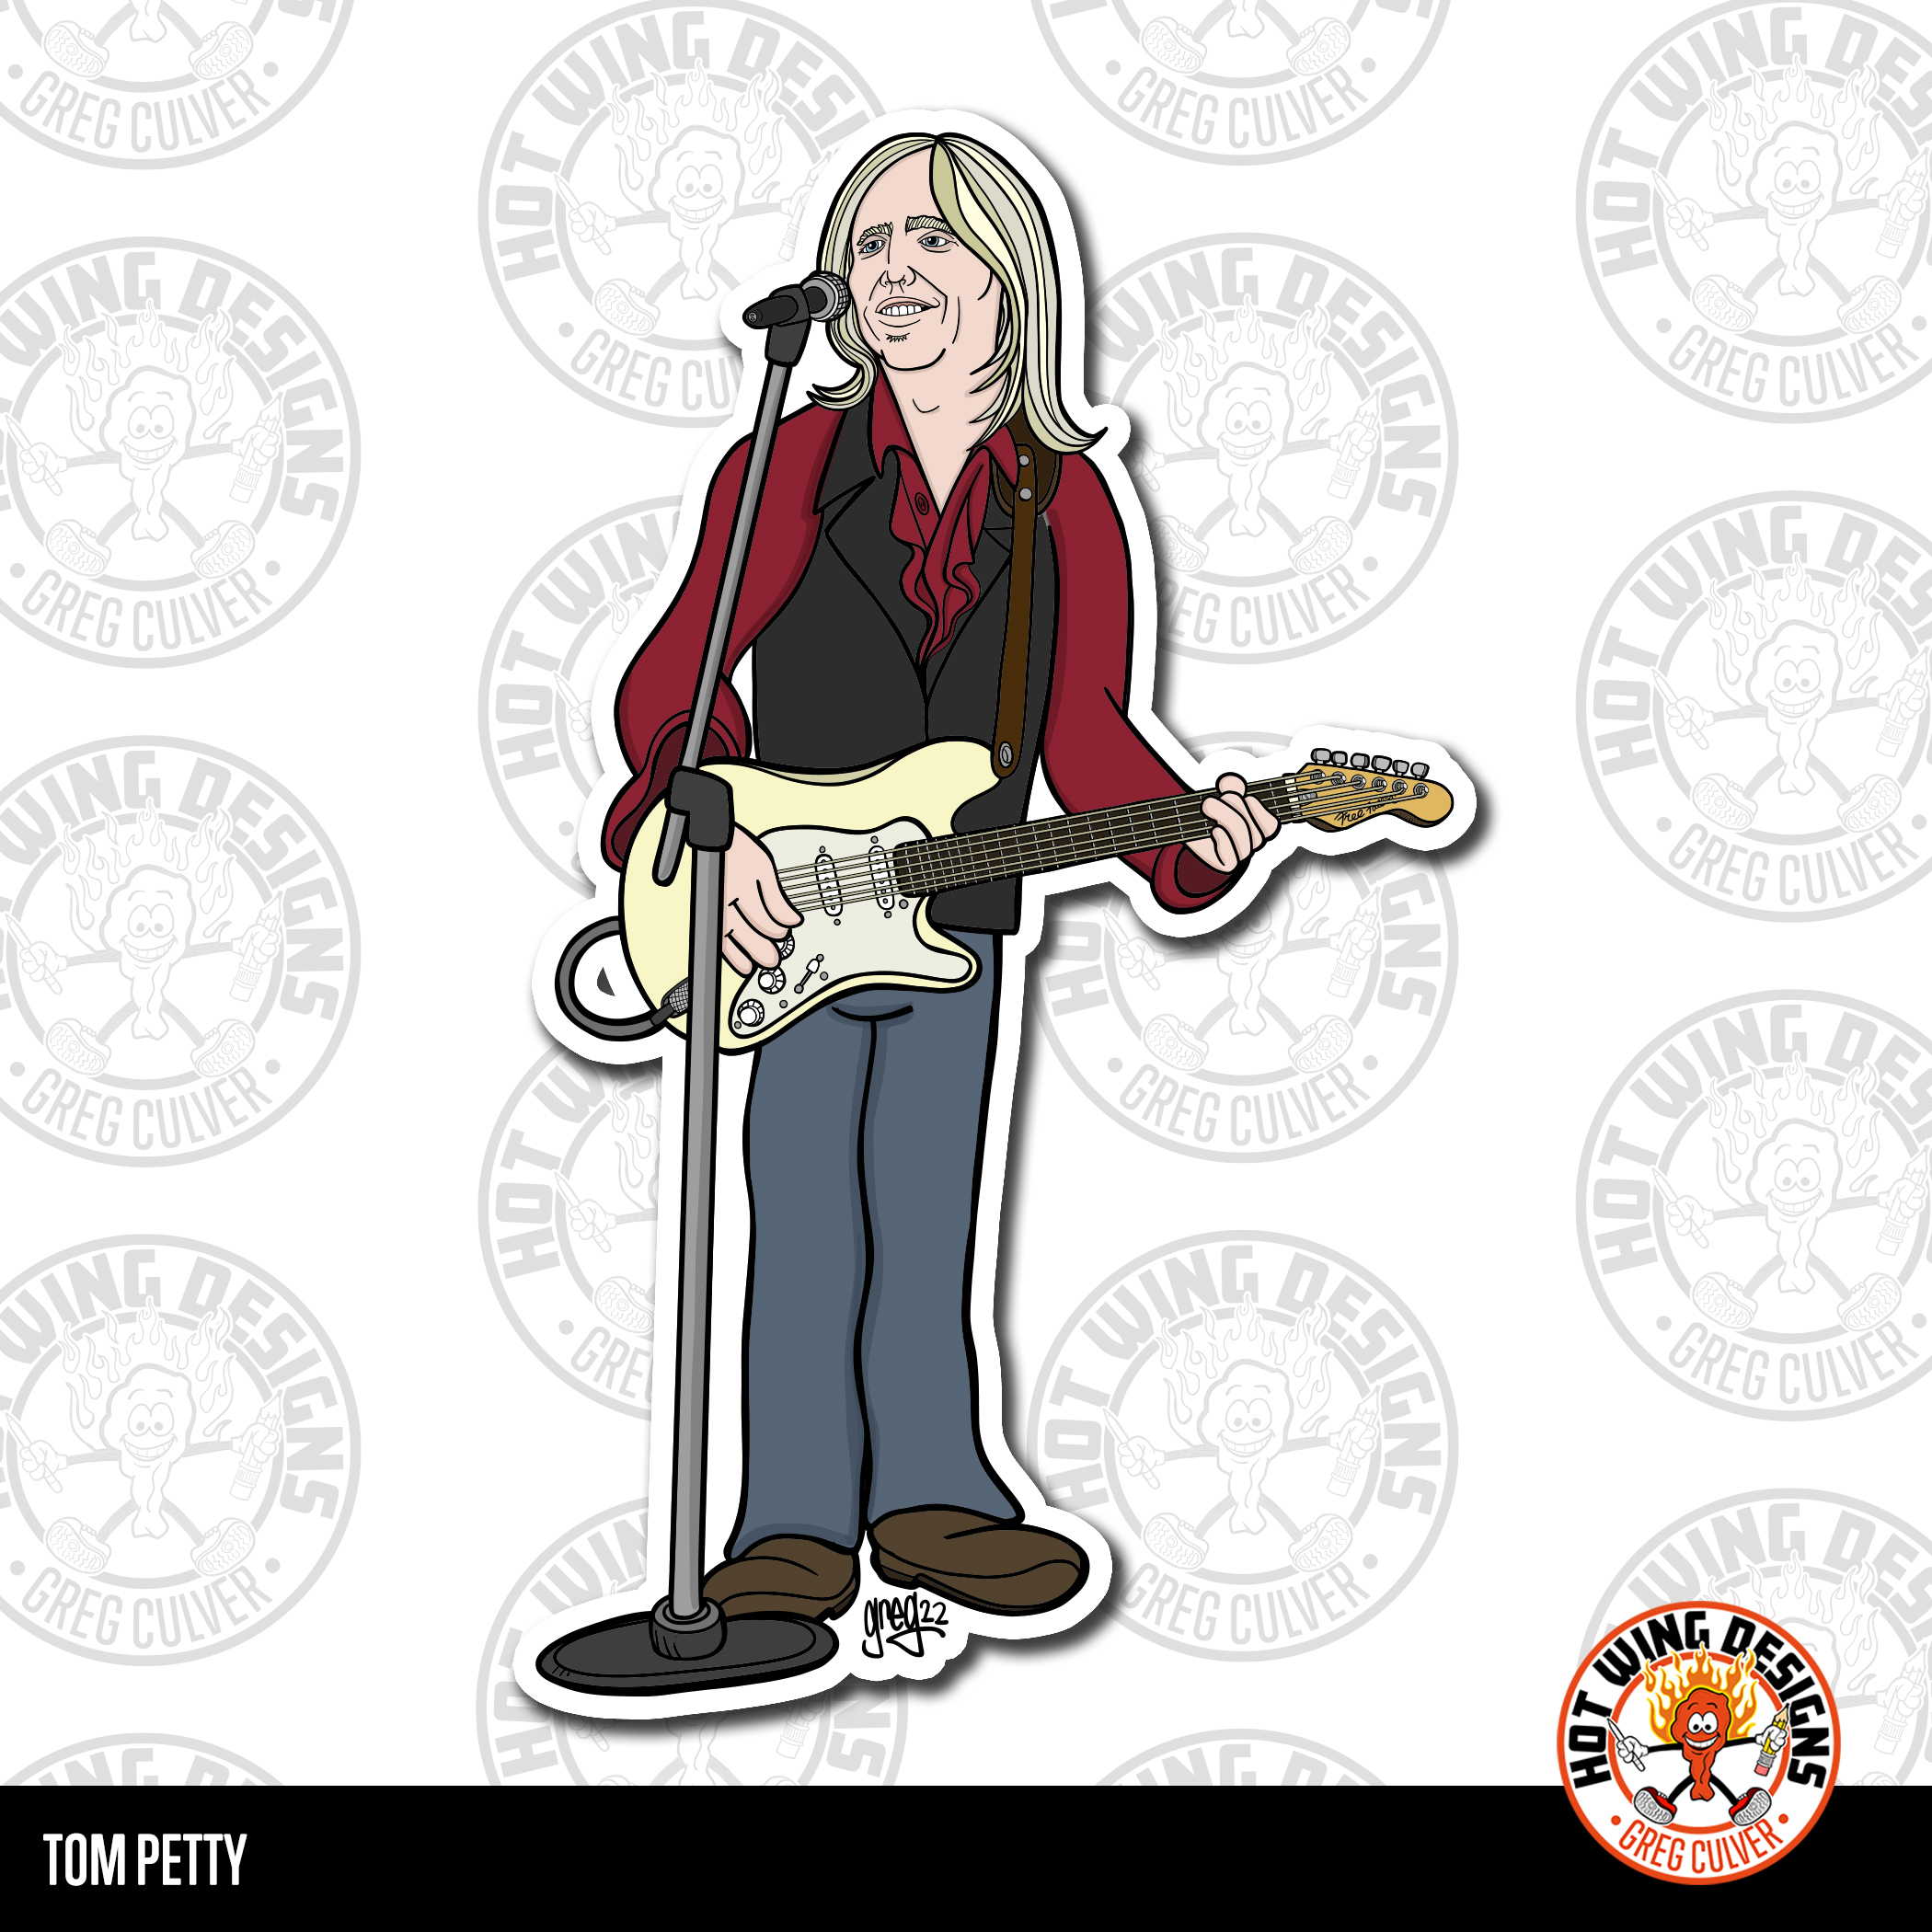 Tom Petty cartoon sticker by Greg Culver and Hot Wing Designs